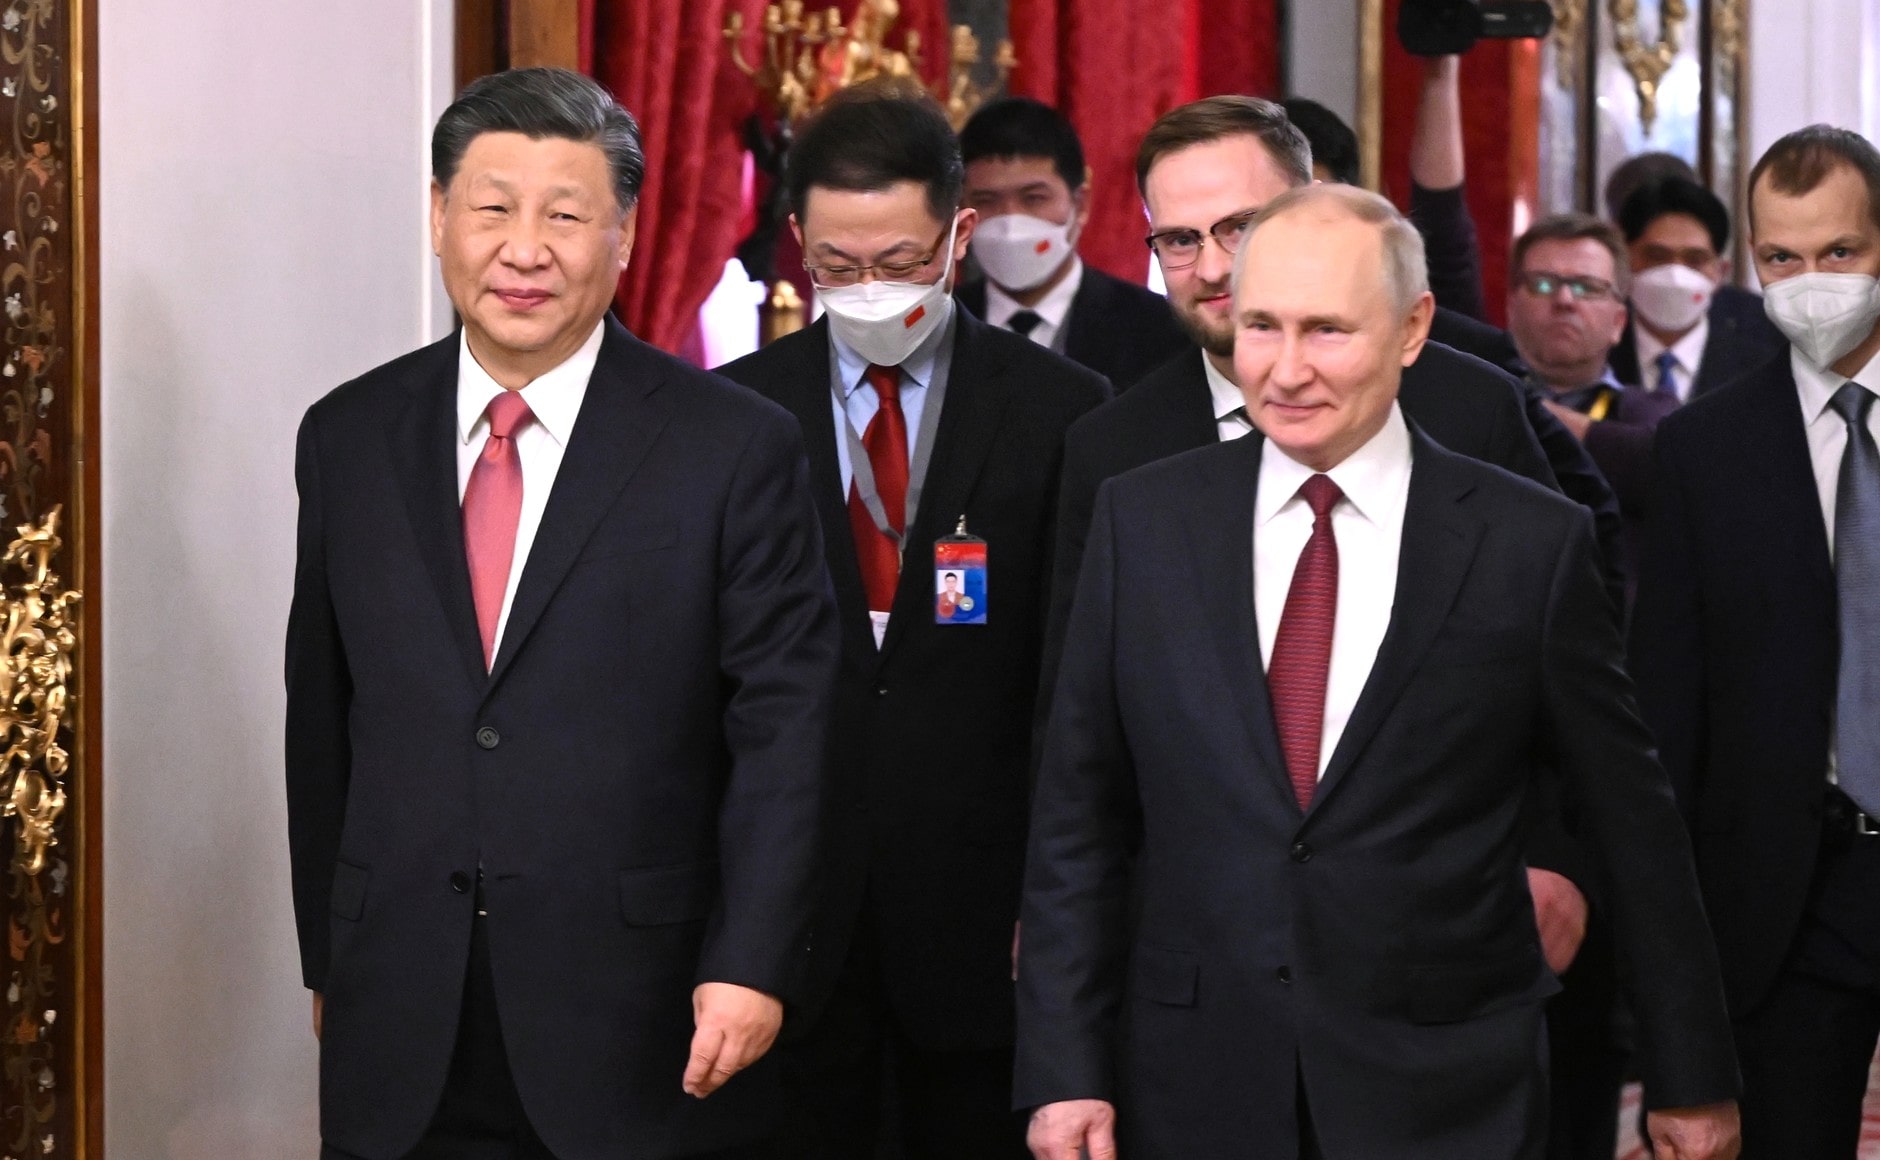 A number of European states are disappointed by Beijing’s rhetorical support for Vladimir Putin. China’s President Xi Jinping with Russian President Vladimir Putin before Russian-Chinese talks at the Kremlin, March 2023 (Grigory Sysoev, RIA Novosti/kremlin.ru)